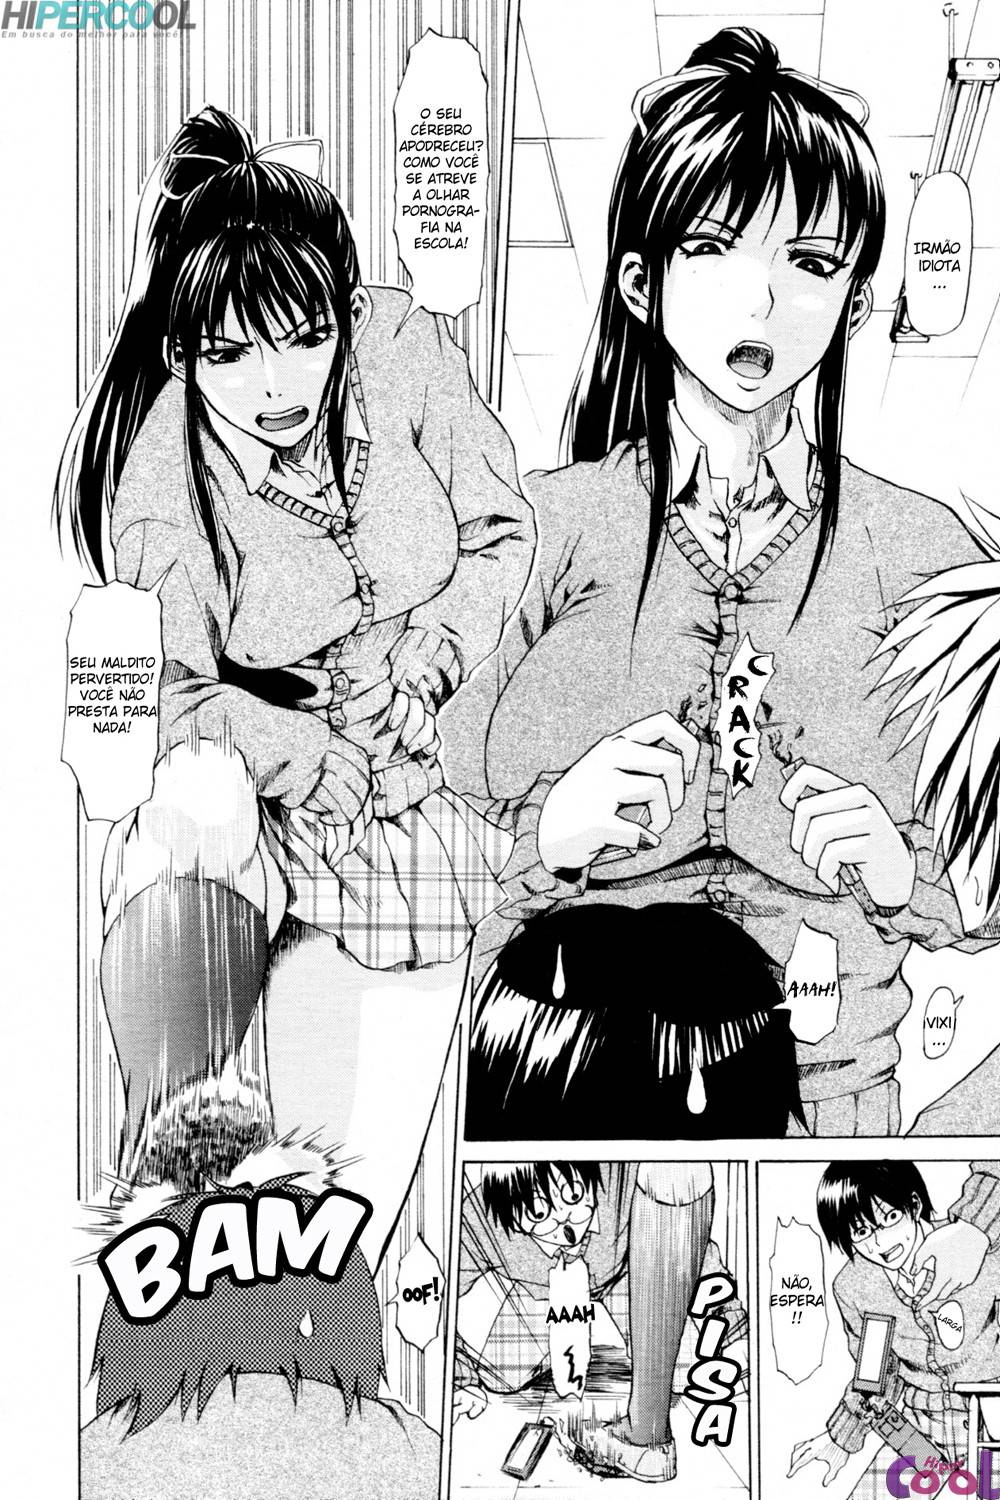 ass-m-chapter-01-page-04.jpg